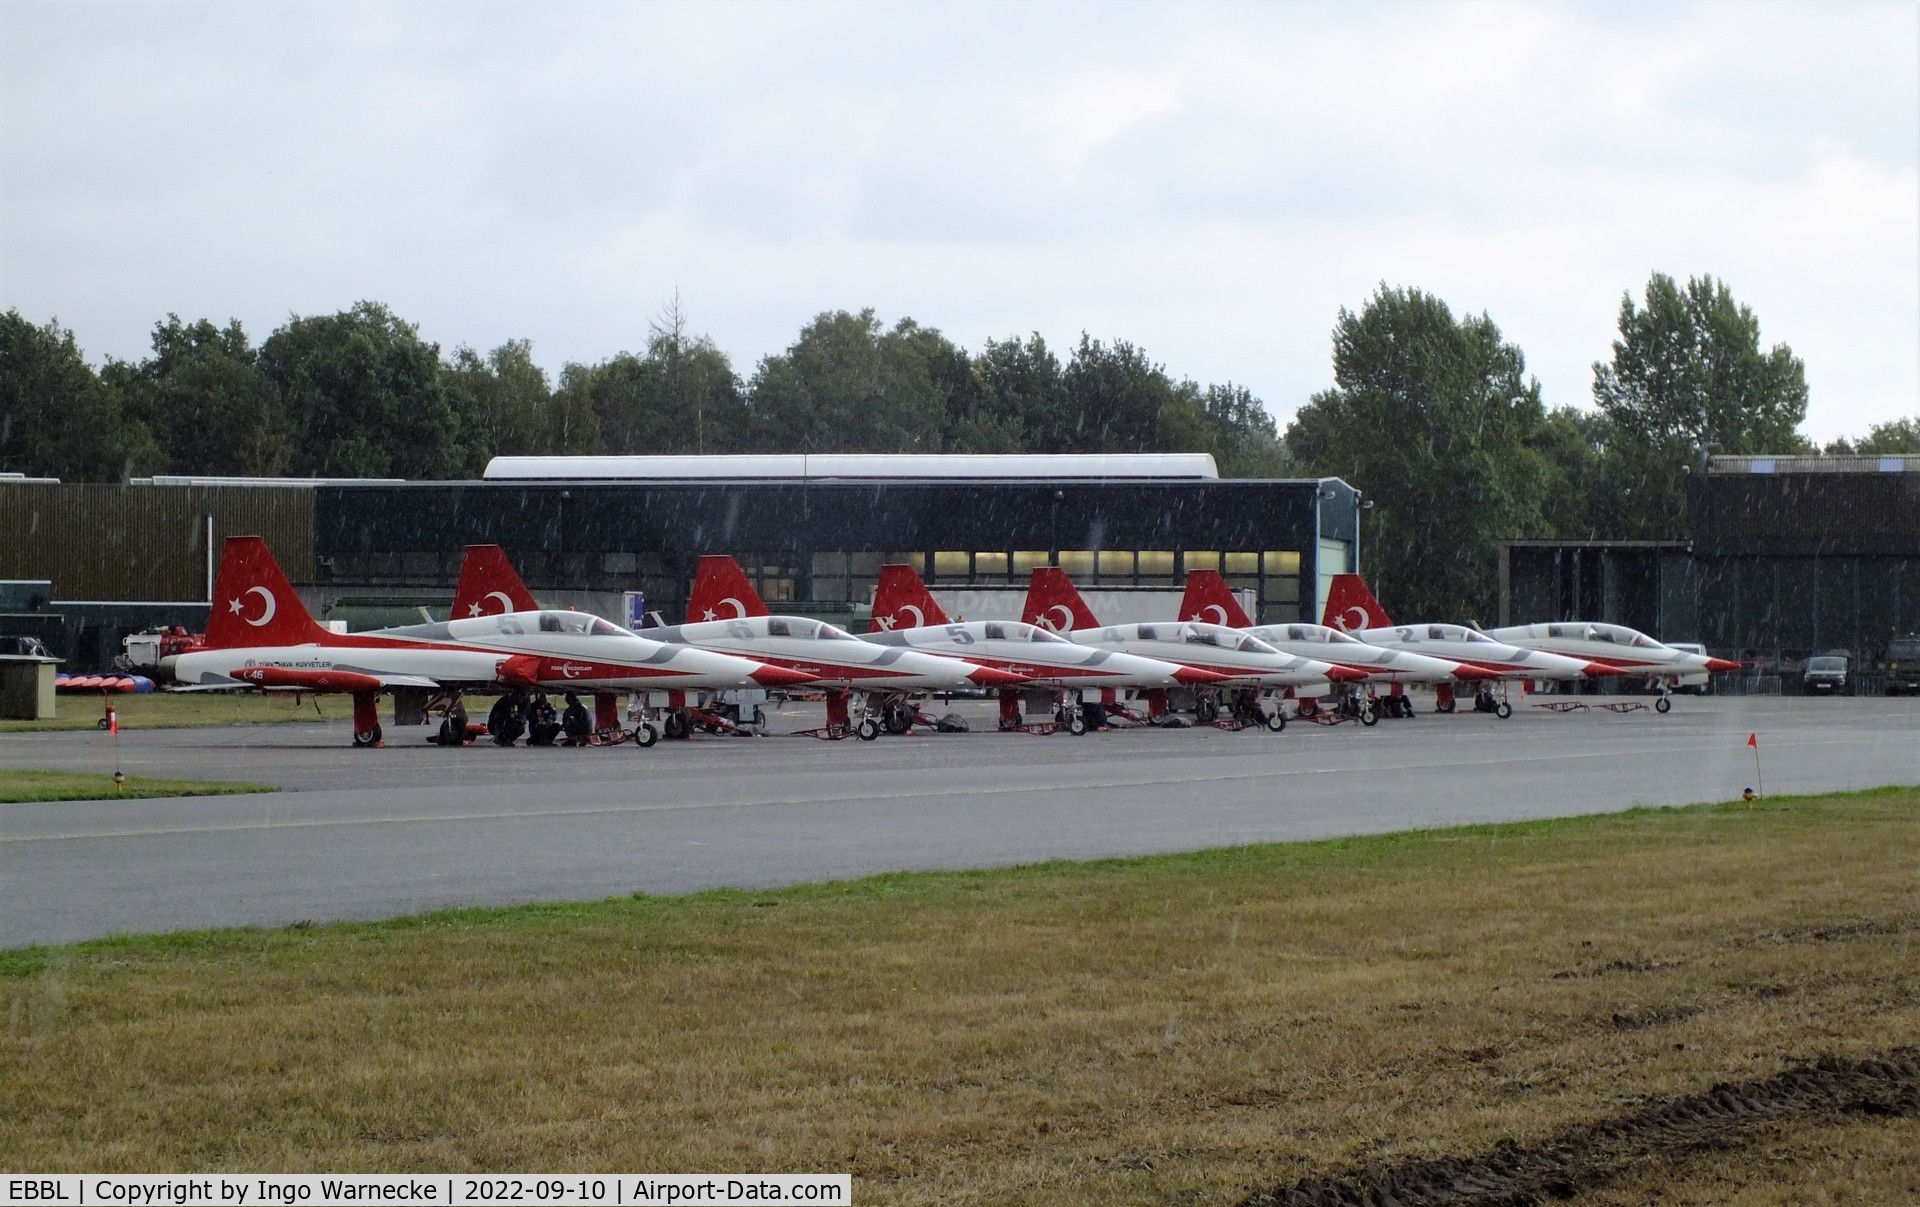 Kleine Brogel Air Base Airport, Kleine Brogel Belgium (EBBL) - Turkish Stars display team lined up in the pouring rain at the 2022 Sanicole Spottersday at Kleine Brogel air base